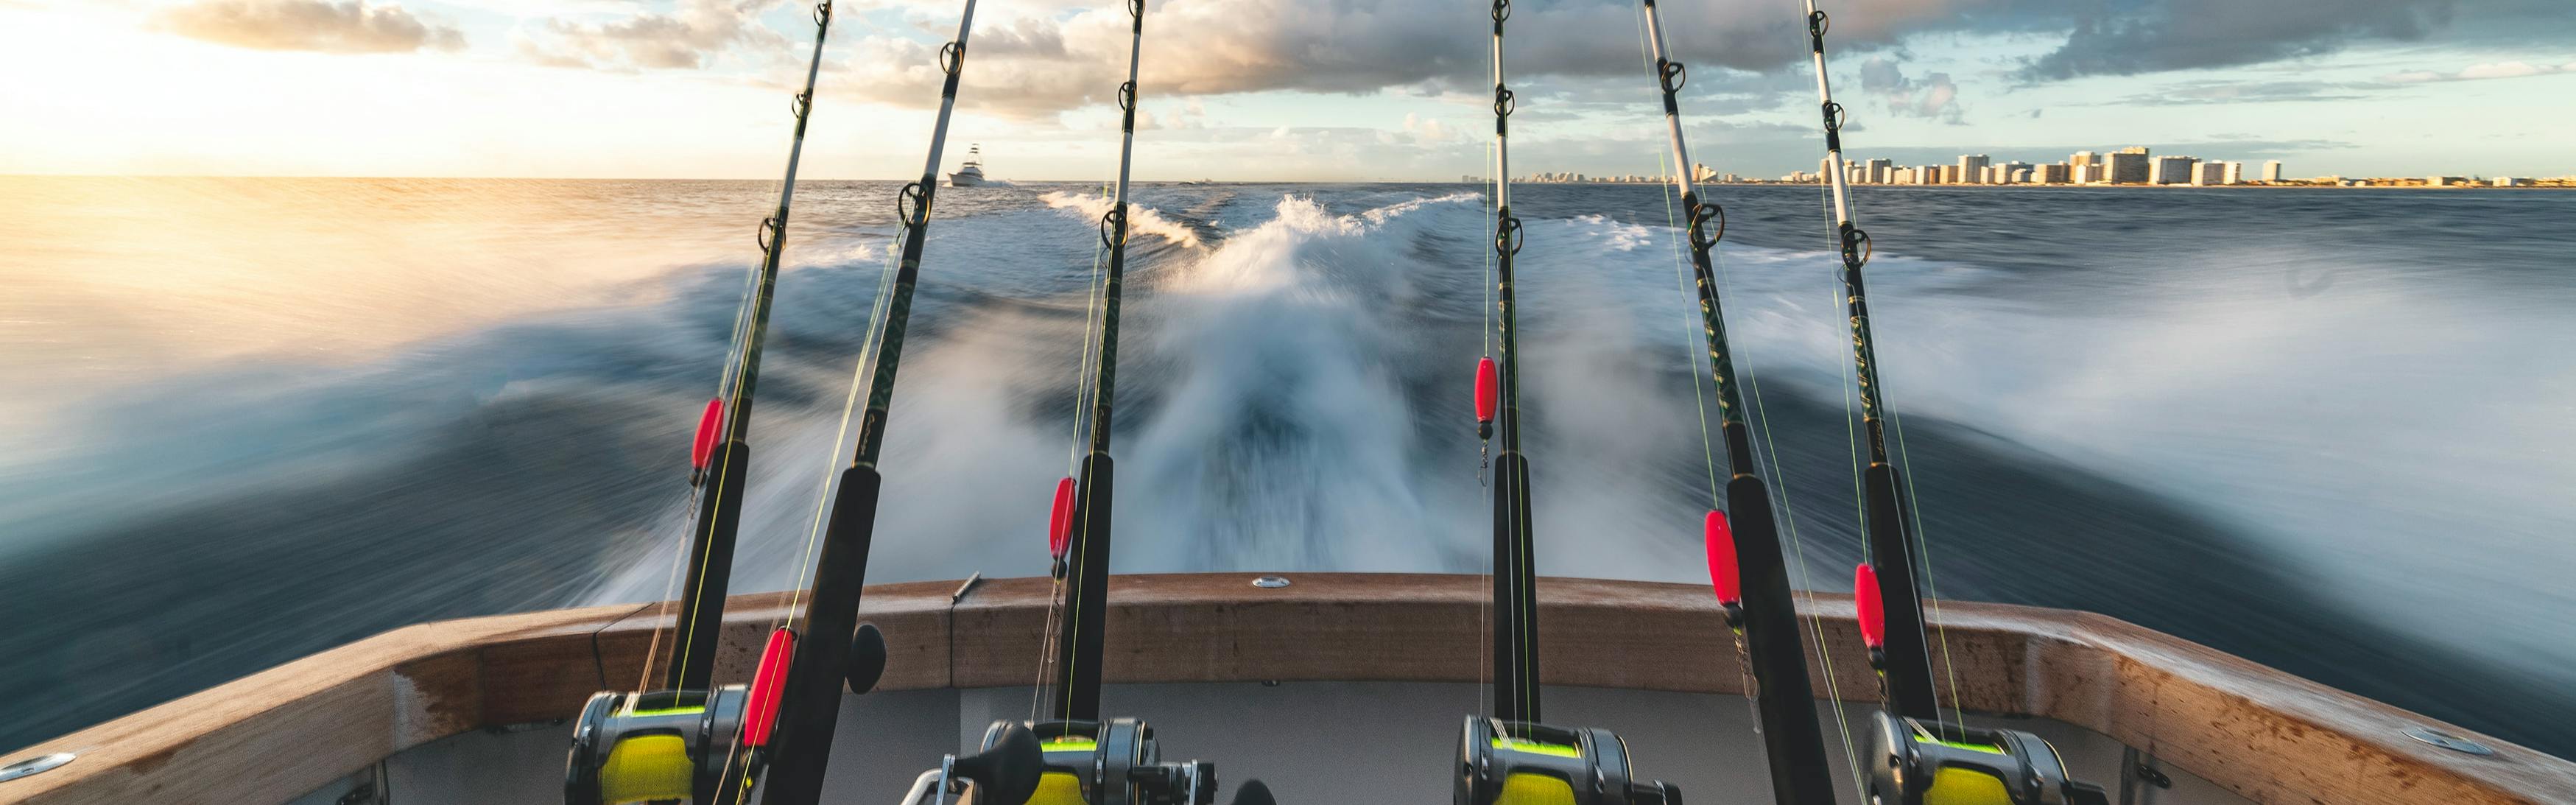 Six rods set up on the back of a boat in motion in the ocean